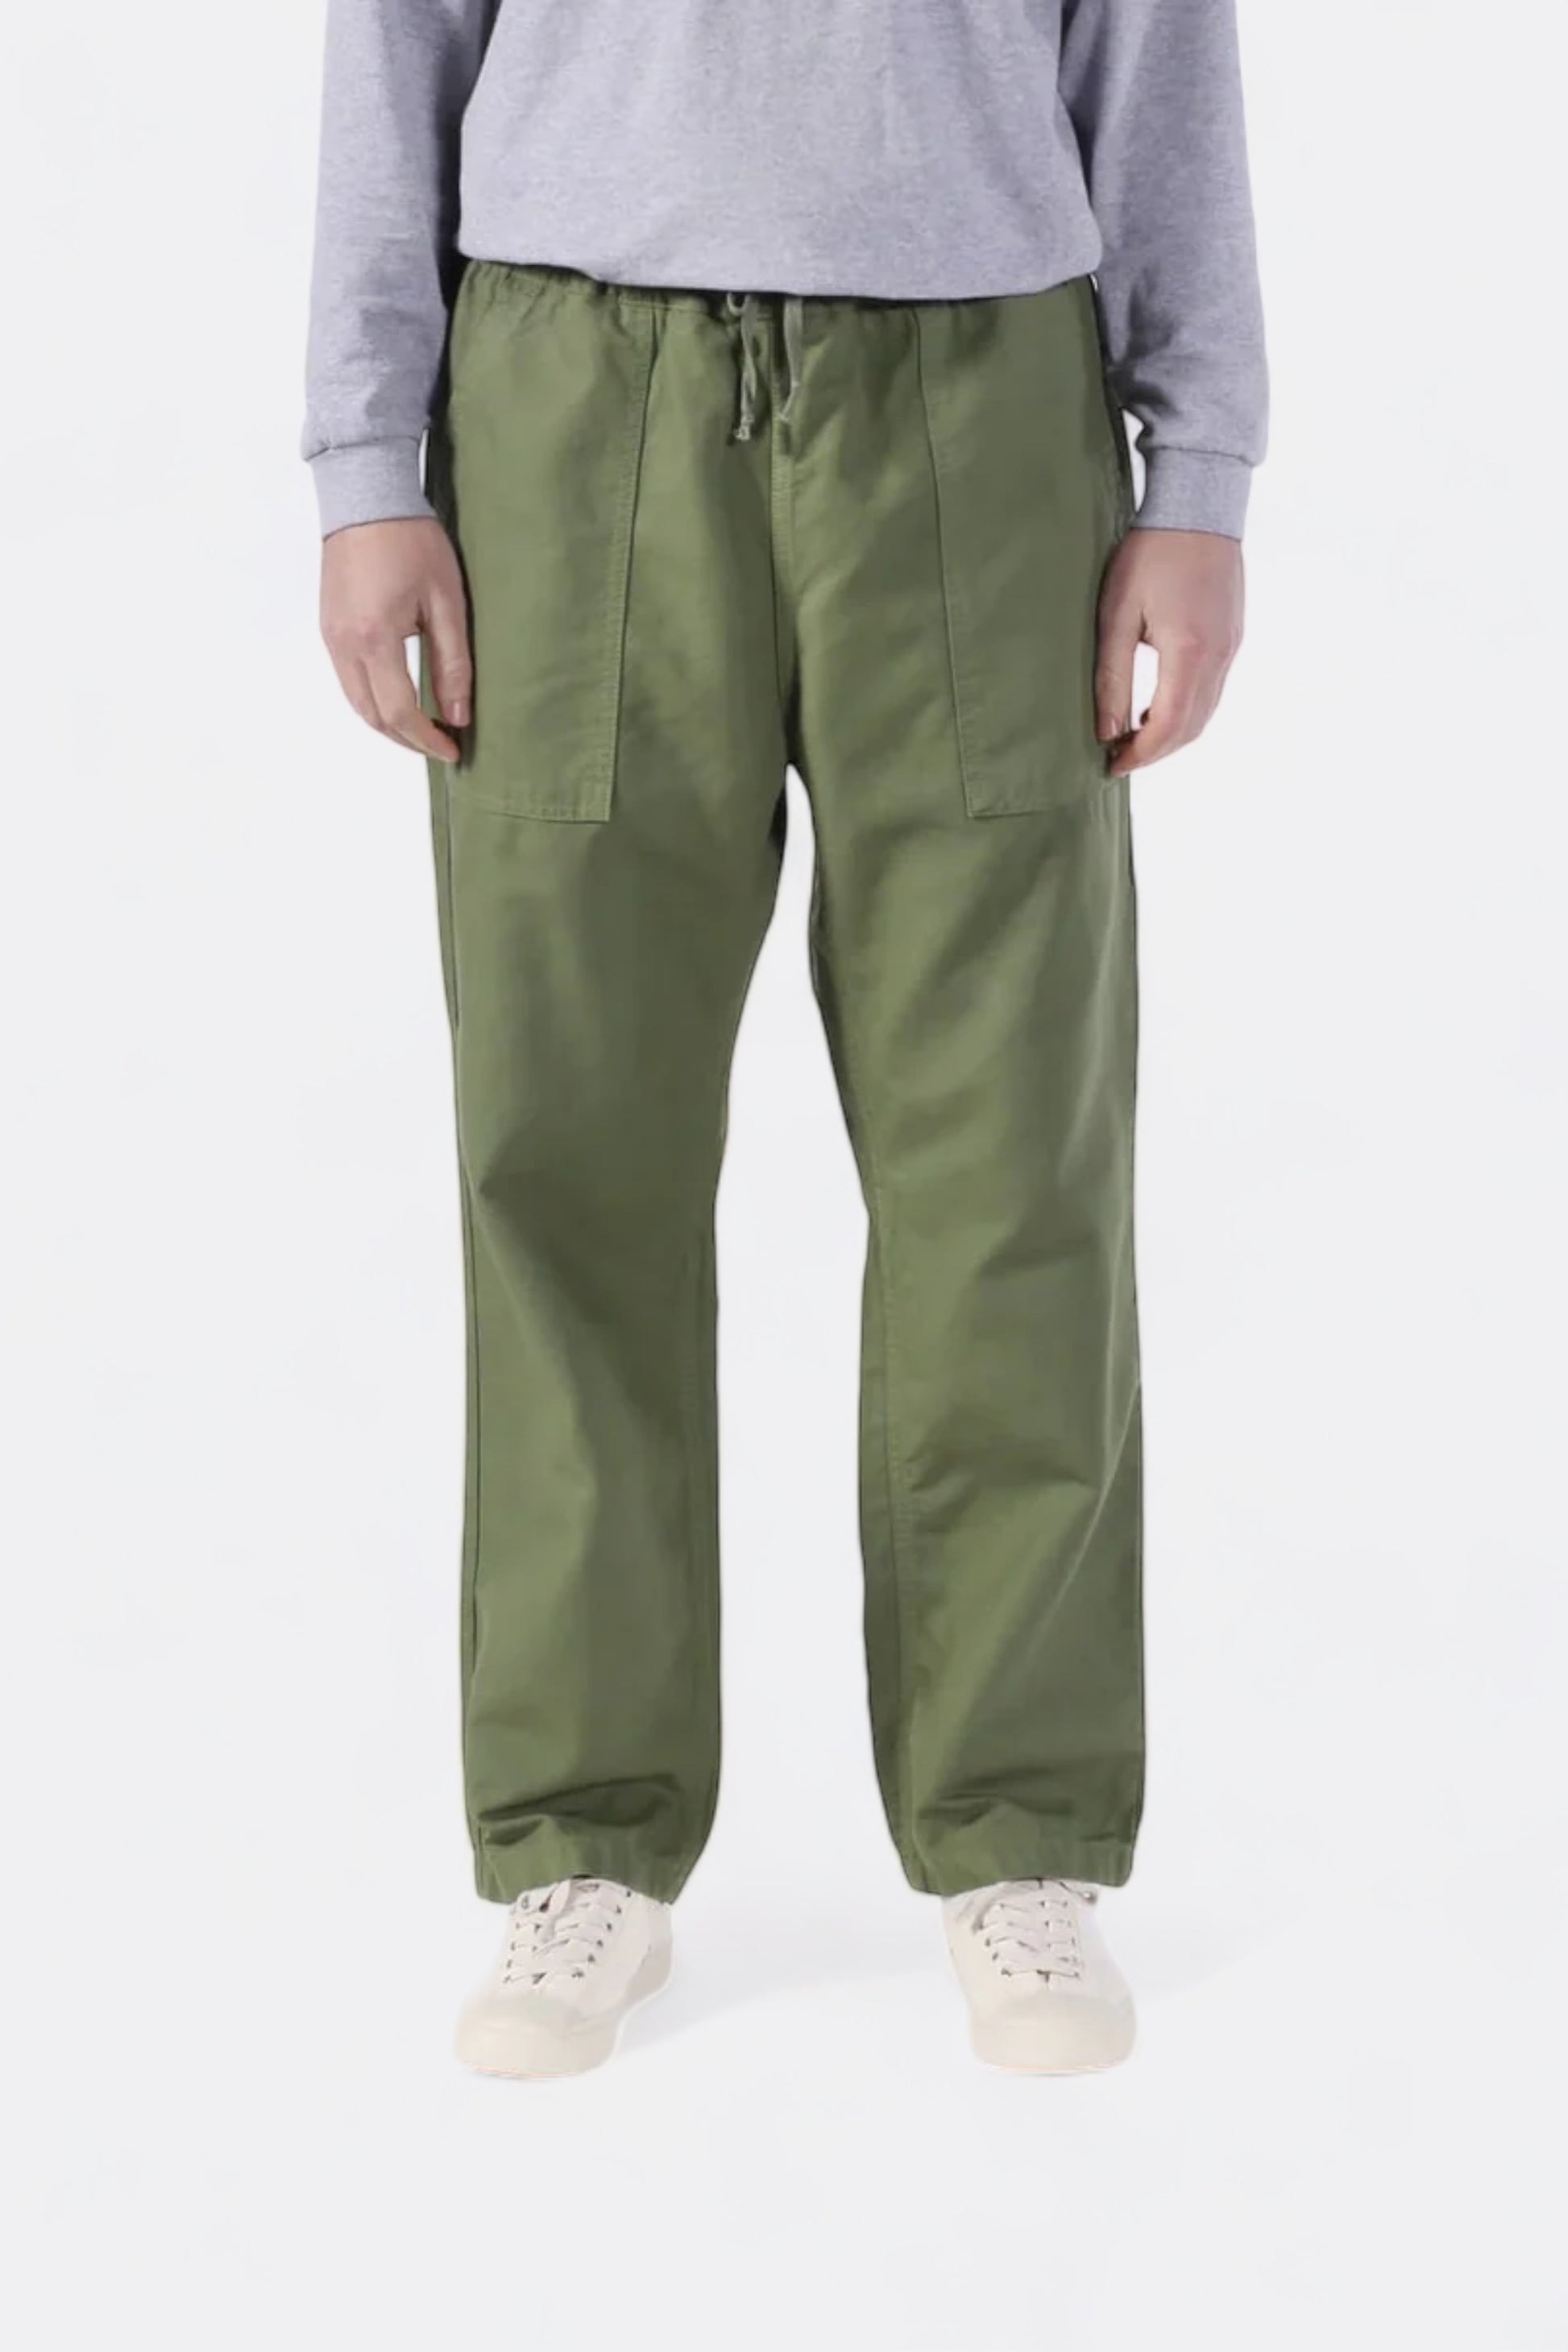 Service Works - Classic Chef Pants (Terracotta)